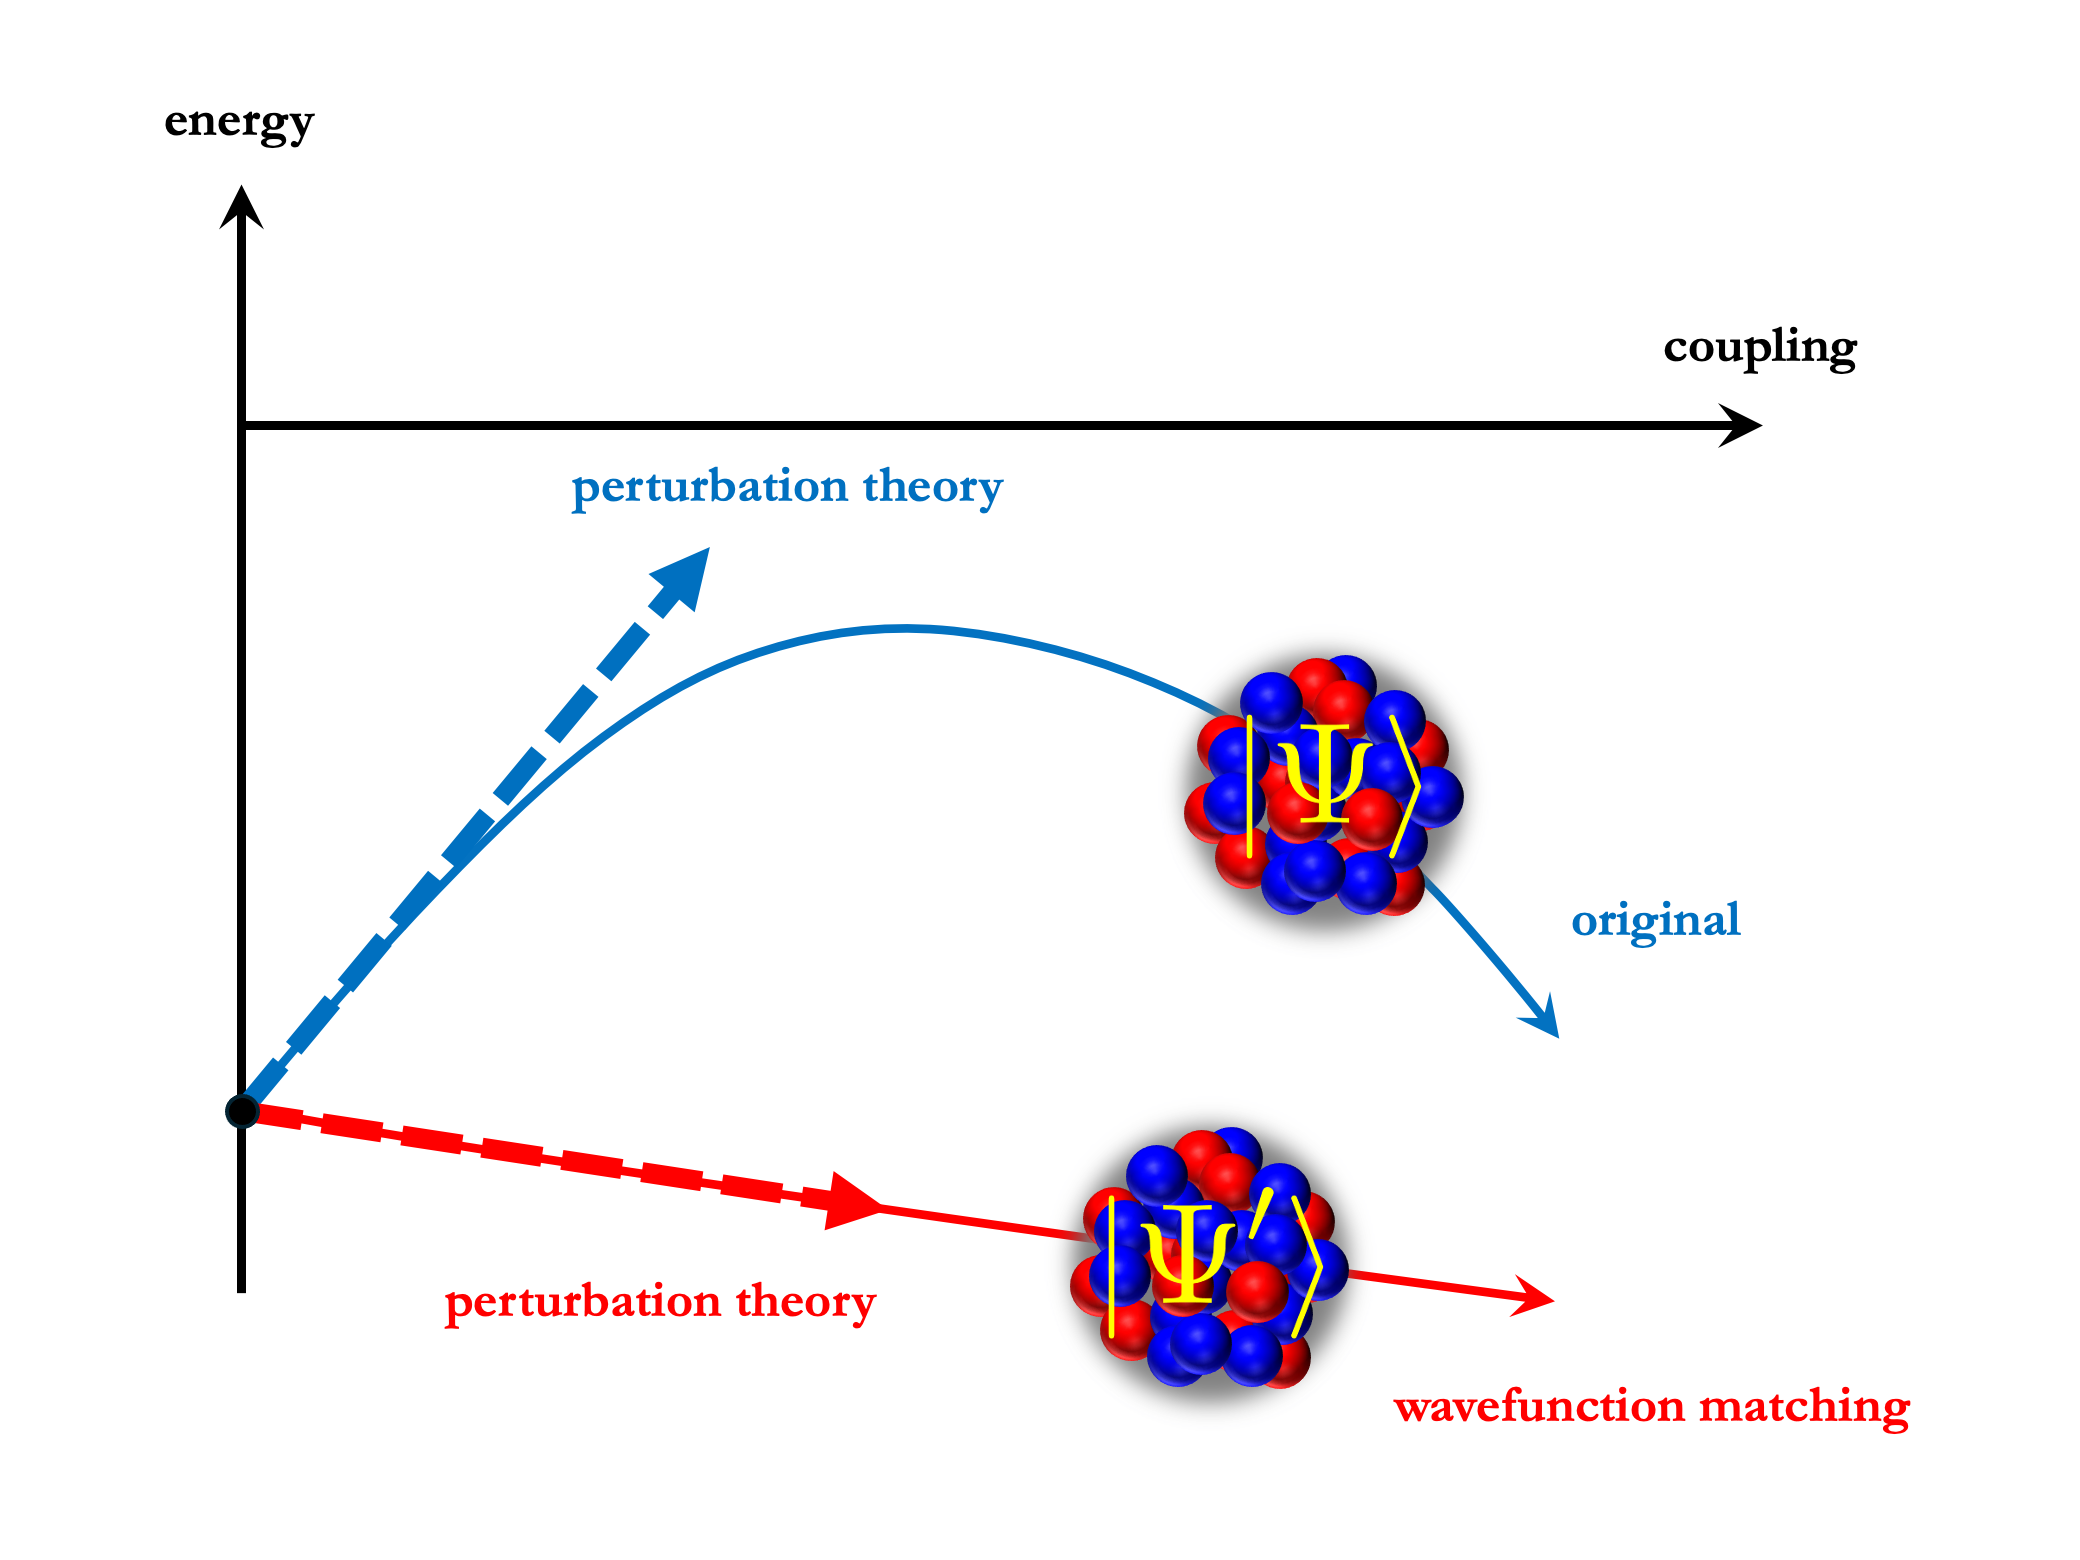 Figure 2. Wave Function Matching Method and Energy. Without using the Wave Function Matching method, perturbation theory is not very applicable. However, when employing the Wave Function Matching method, perturbation theory applies effectively.